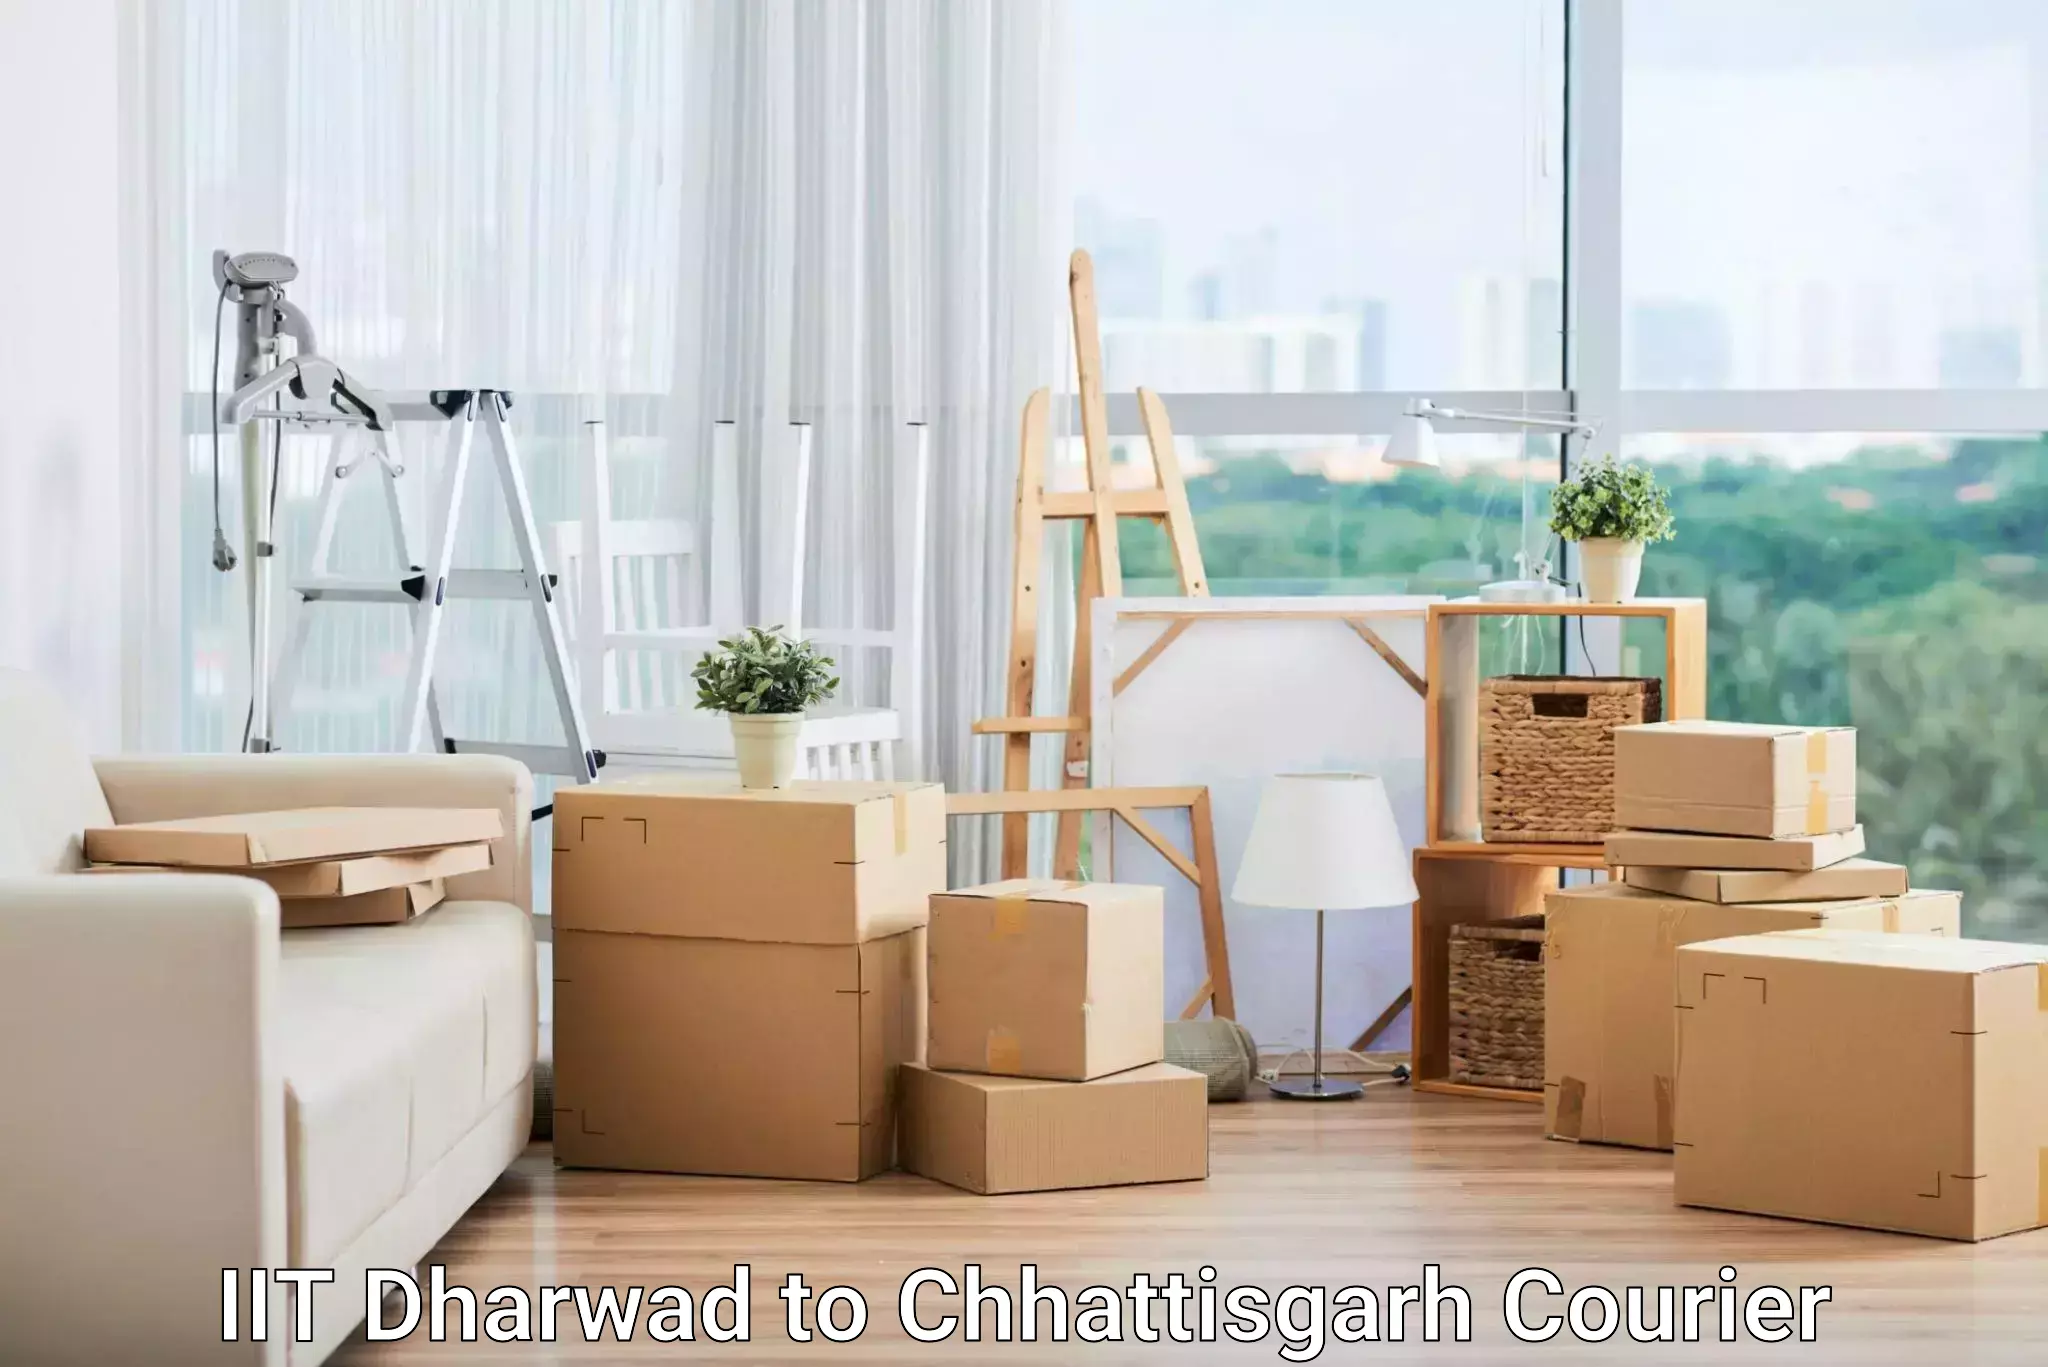 User-friendly delivery service IIT Dharwad to Bhilai